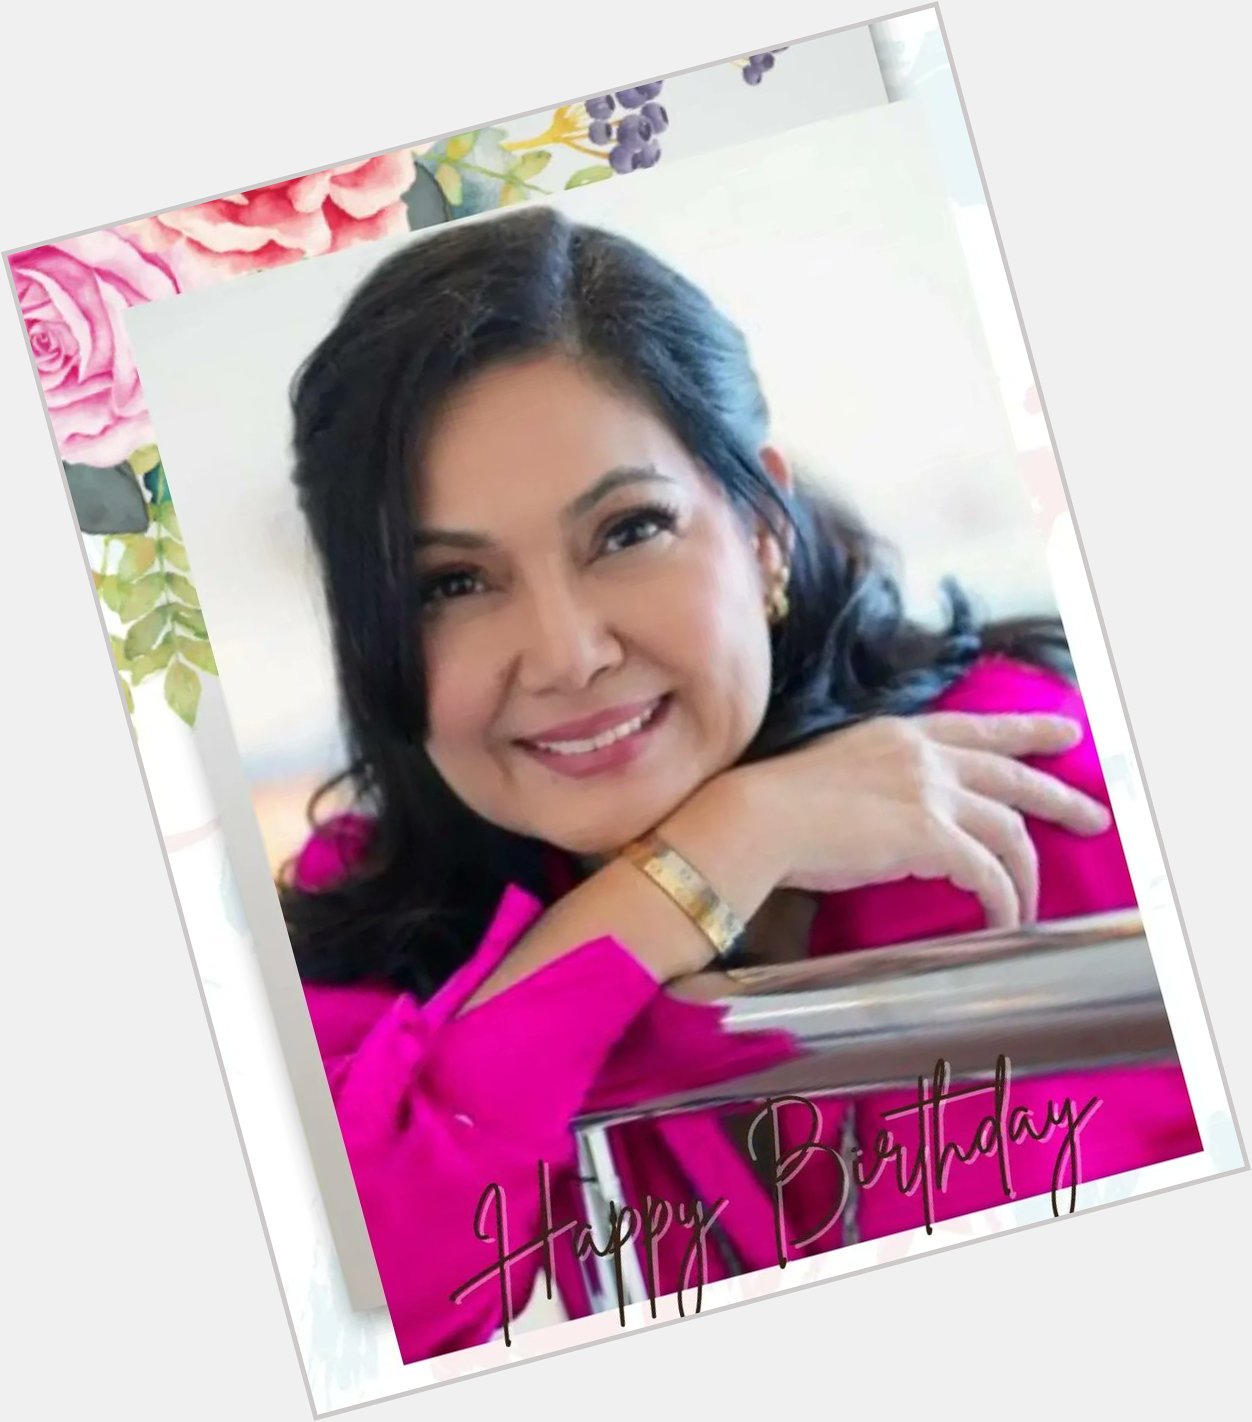 You are beautiful inside and out
We love you Inay Marya!
Happy birthday   MARICEL SORIANO DAY 